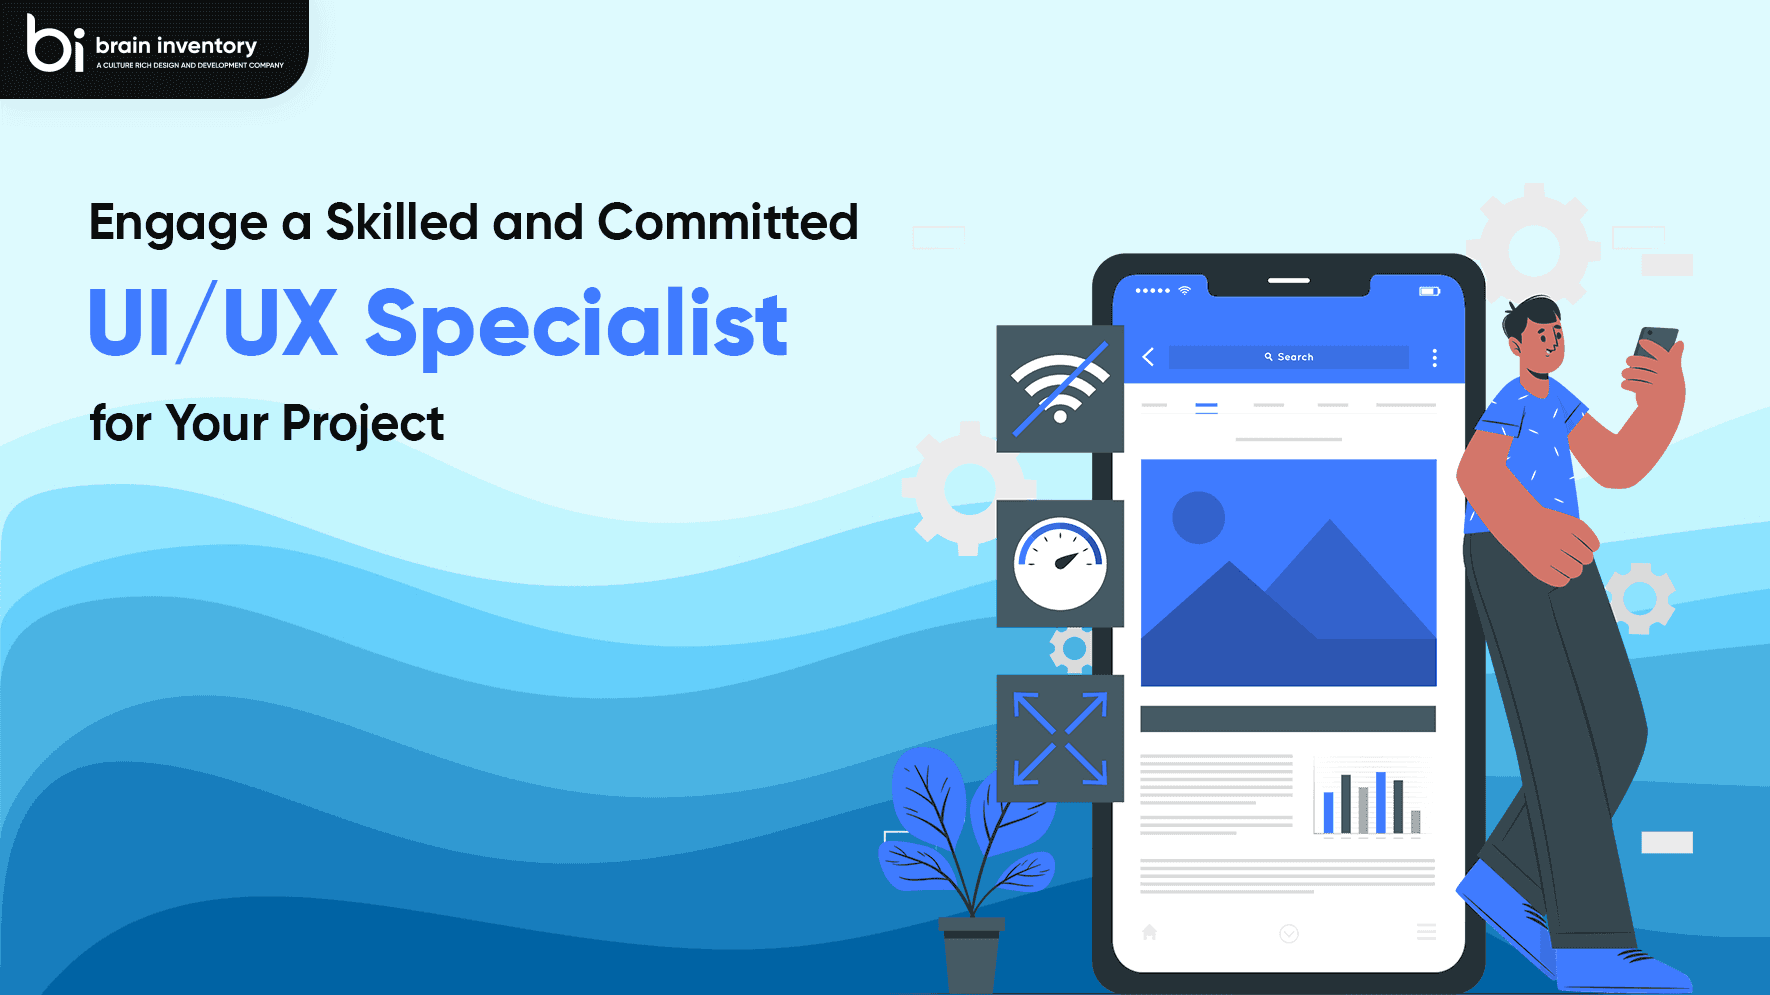 Engage a Skilled and Committed UI/UX Specialist for Your Project